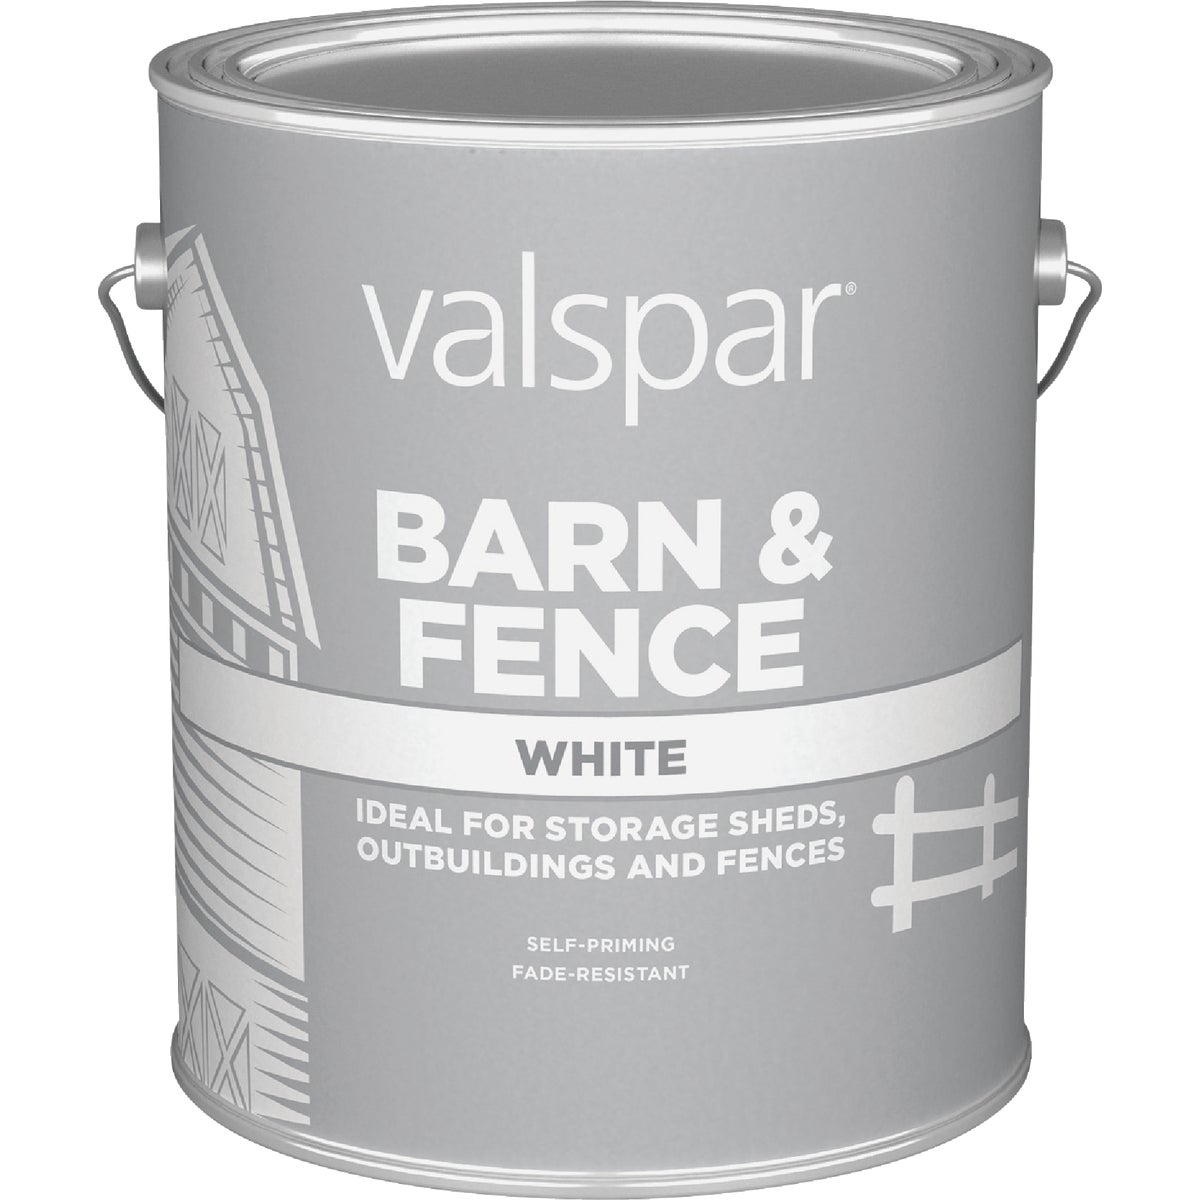 Valspar Oil Paint & Primer In One Low Sheen Barn & Fence Paint, White, 1 Gal.